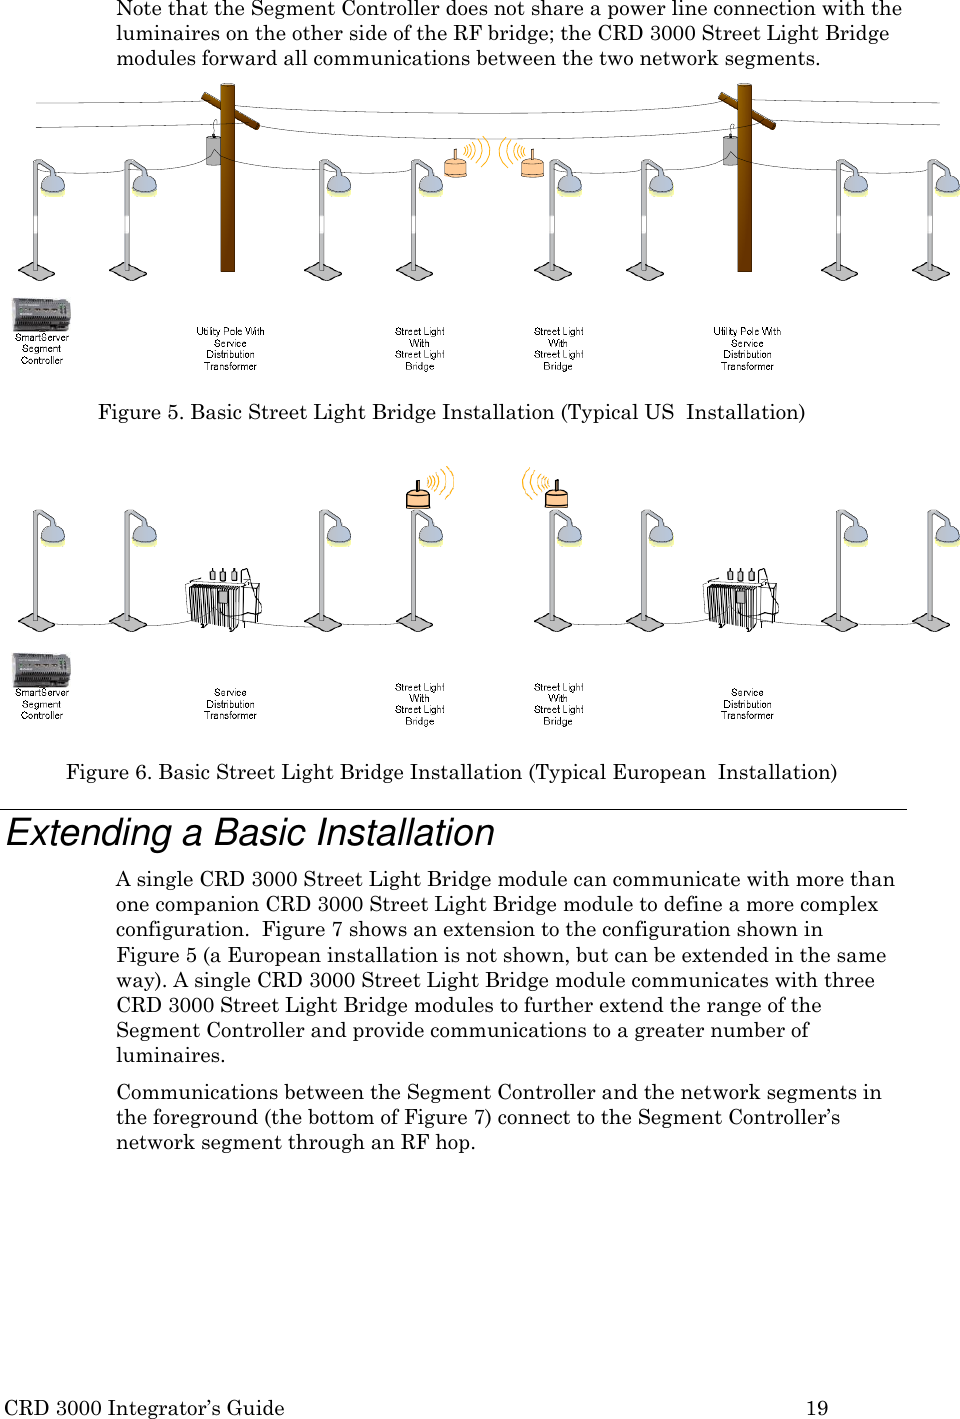 CRD 3000 Integrator’s Guide 19  Note that the Segment Controller does not share a power line connection with the luminaires on the other side of the RF bridge; the CRD 3000 Street Light Bridge modules forward all communications between the two network segments.   Figure 5. Basic Street Light Bridge Installation (Typical US  Installation)        Figure 6. Basic Street Light Bridge Installation (Typical European  Installation)  Extending a Basic Installation A single CRD 3000 Street Light Bridge module can communicate with more than one companion CRD 3000 Street Light Bridge module to define a more complex configuration.  Figure 7 shows an extension to the configuration shown in  Figure 5 (a European installation is not shown, but can be extended in the same way). A single CRD 3000 Street Light Bridge module communicates with three CRD 3000 Street Light Bridge modules to further extend the range of the Segment Controller and provide communications to a greater number of luminaires. Communications between the Segment Controller and the network segments in the foreground (the bottom of Figure 7) connect to the Segment Controller’s network segment through an RF hop. 